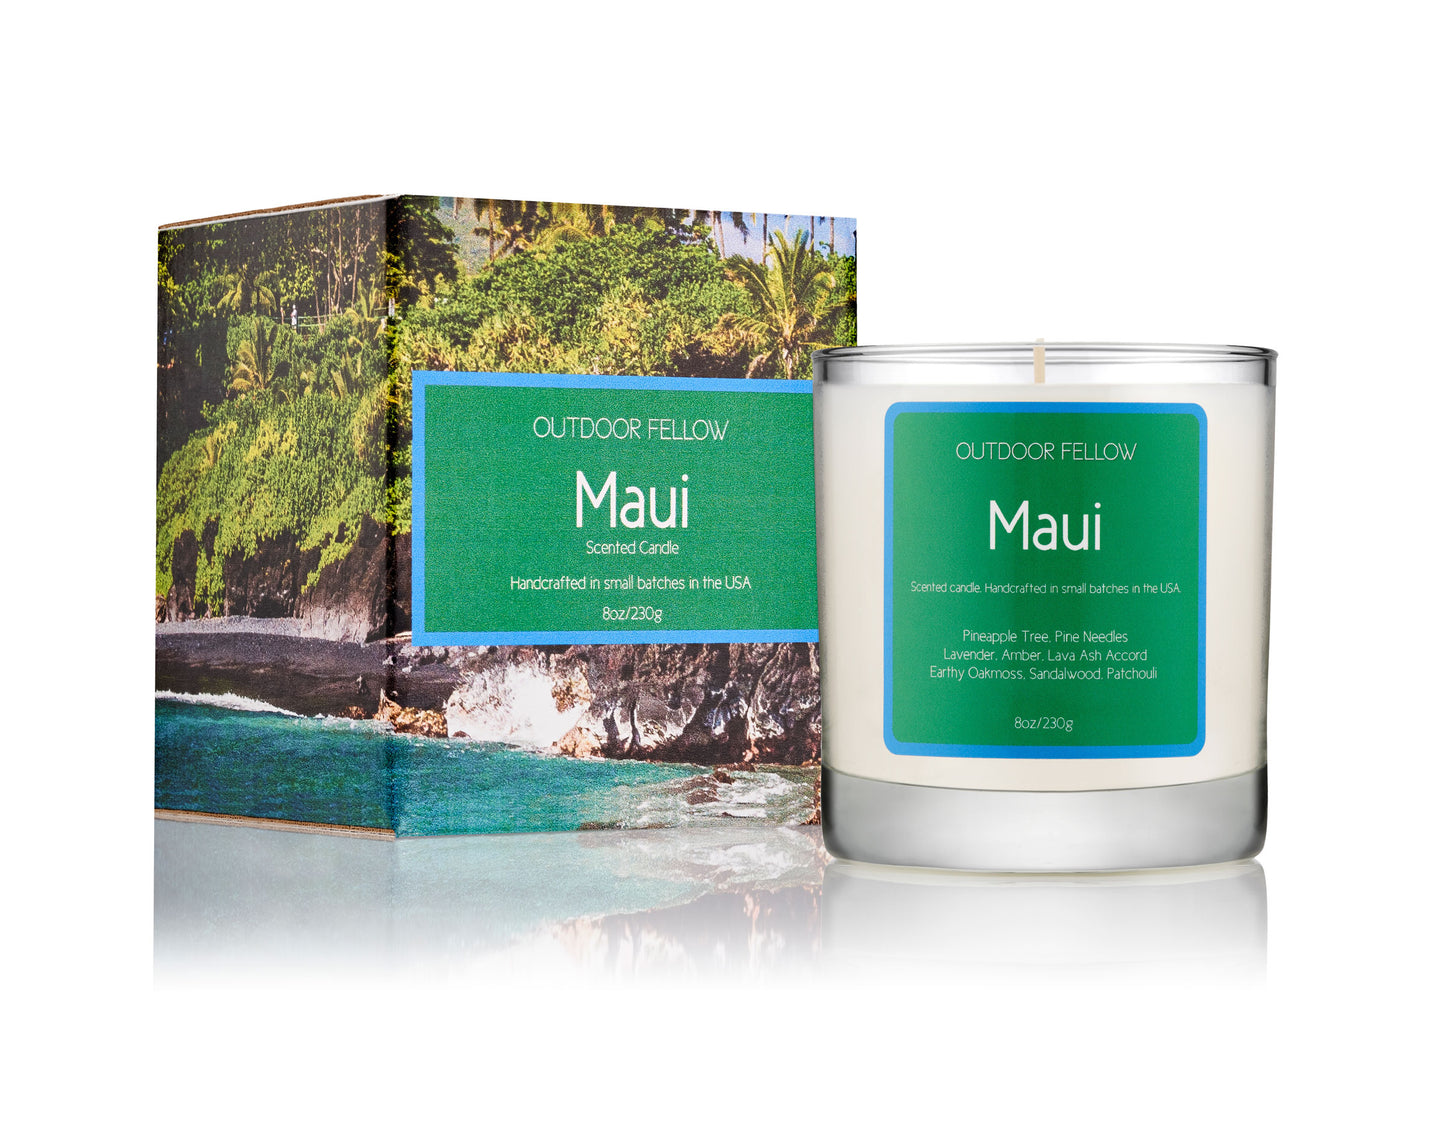 Maui scented candle next to packaging on white background